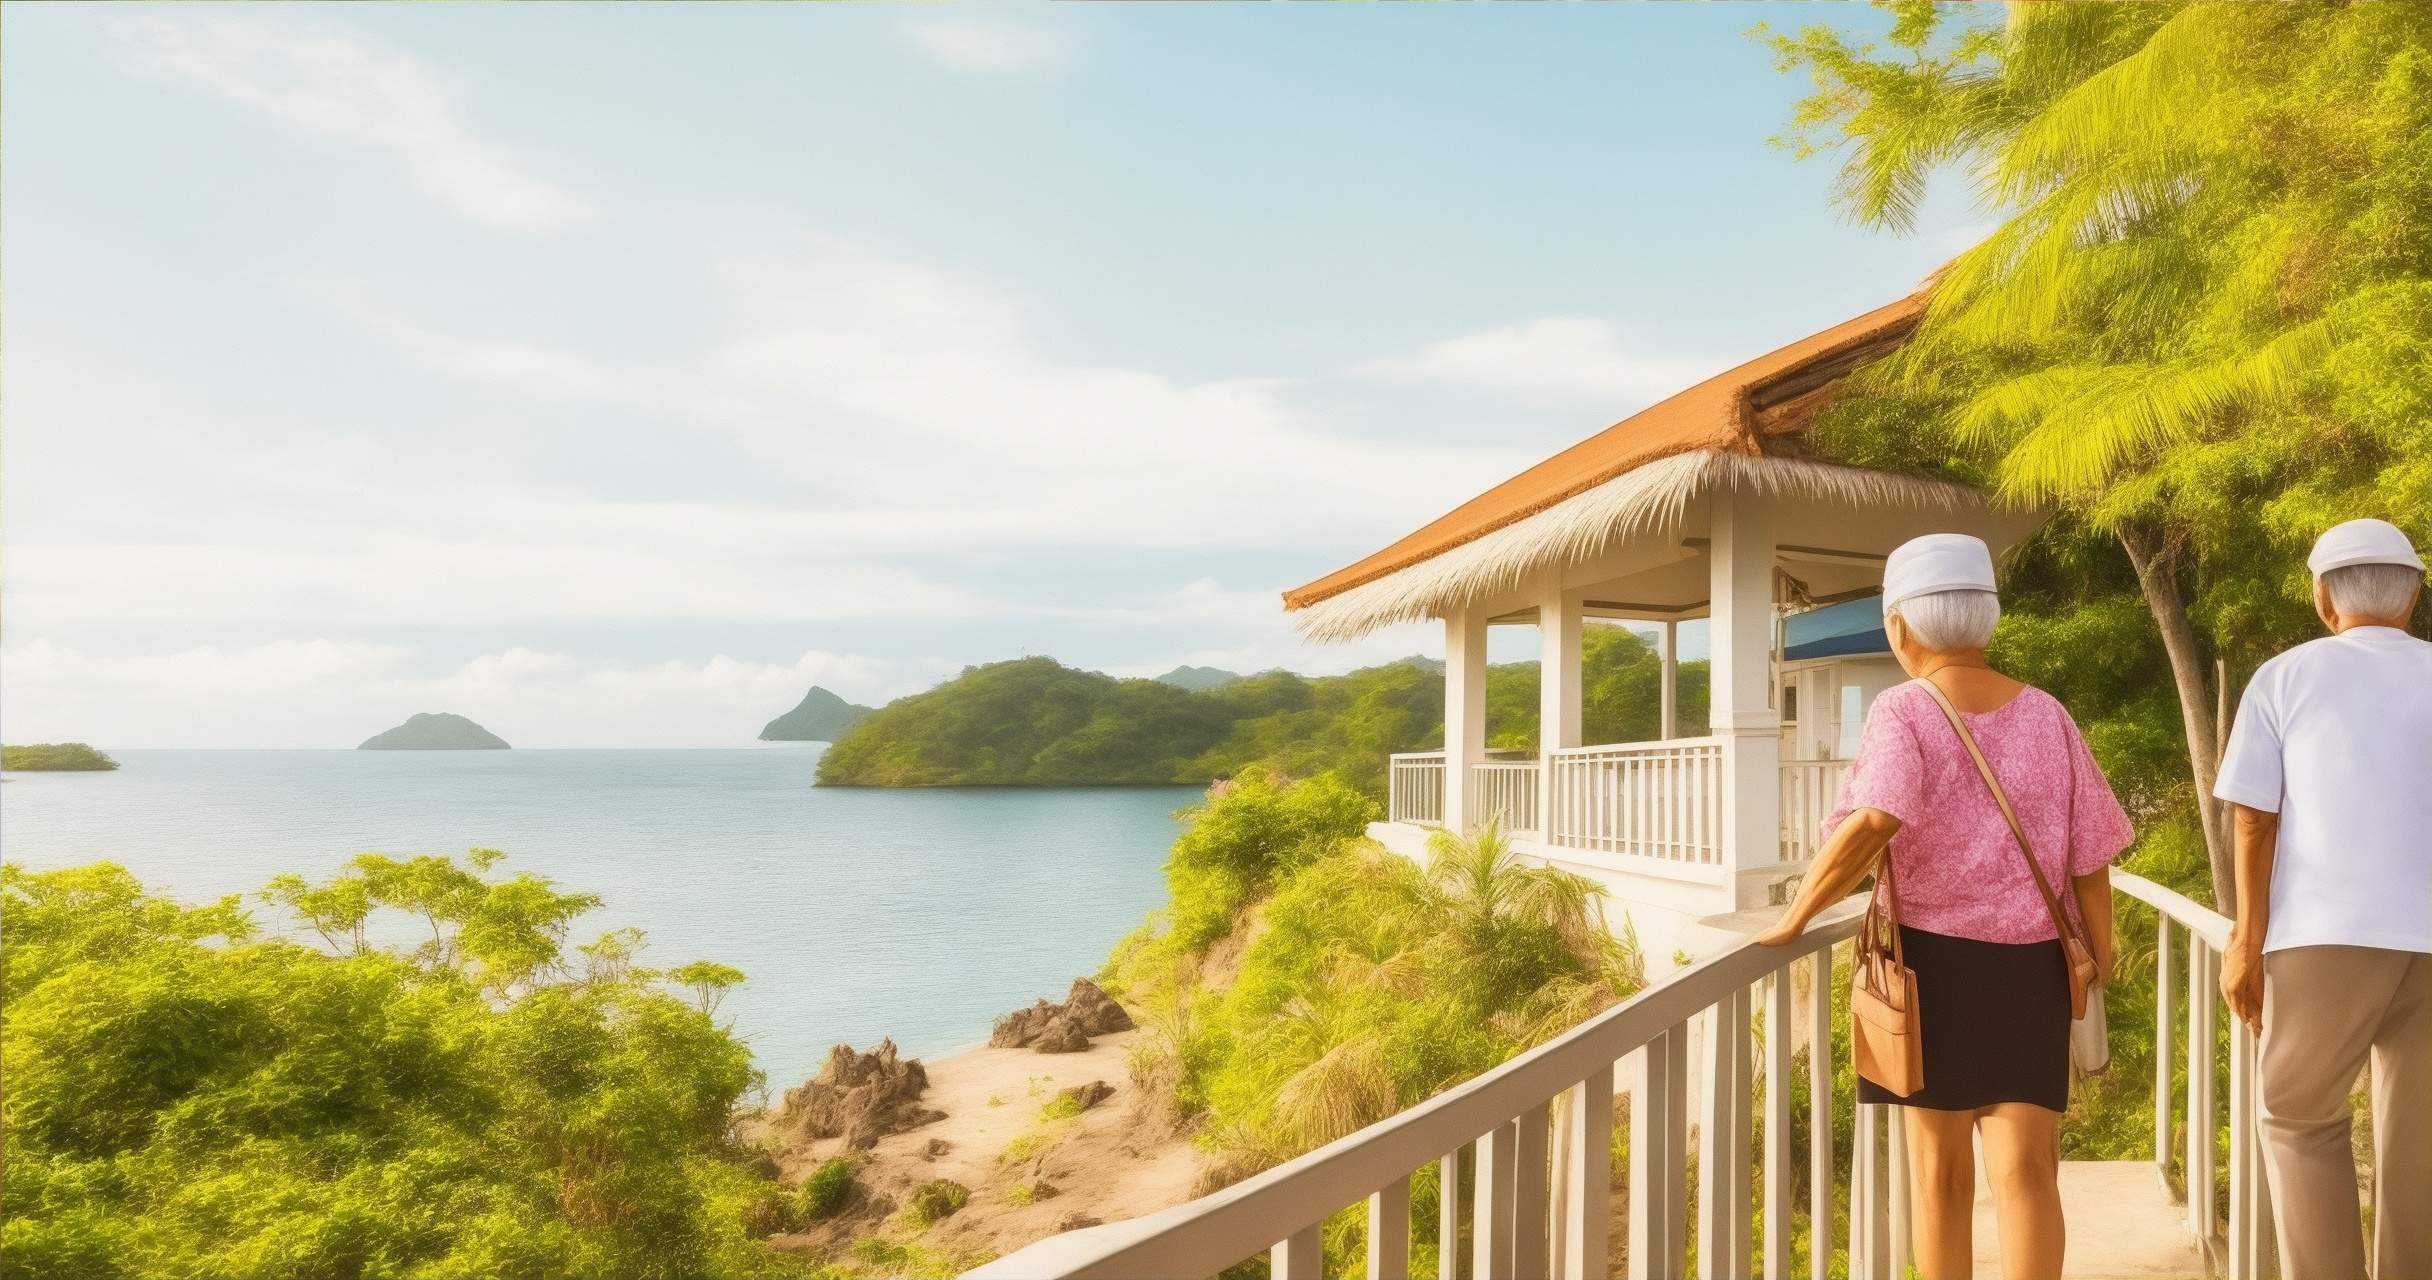 Retiring in the Philippines: A Property Buyer’s Guide